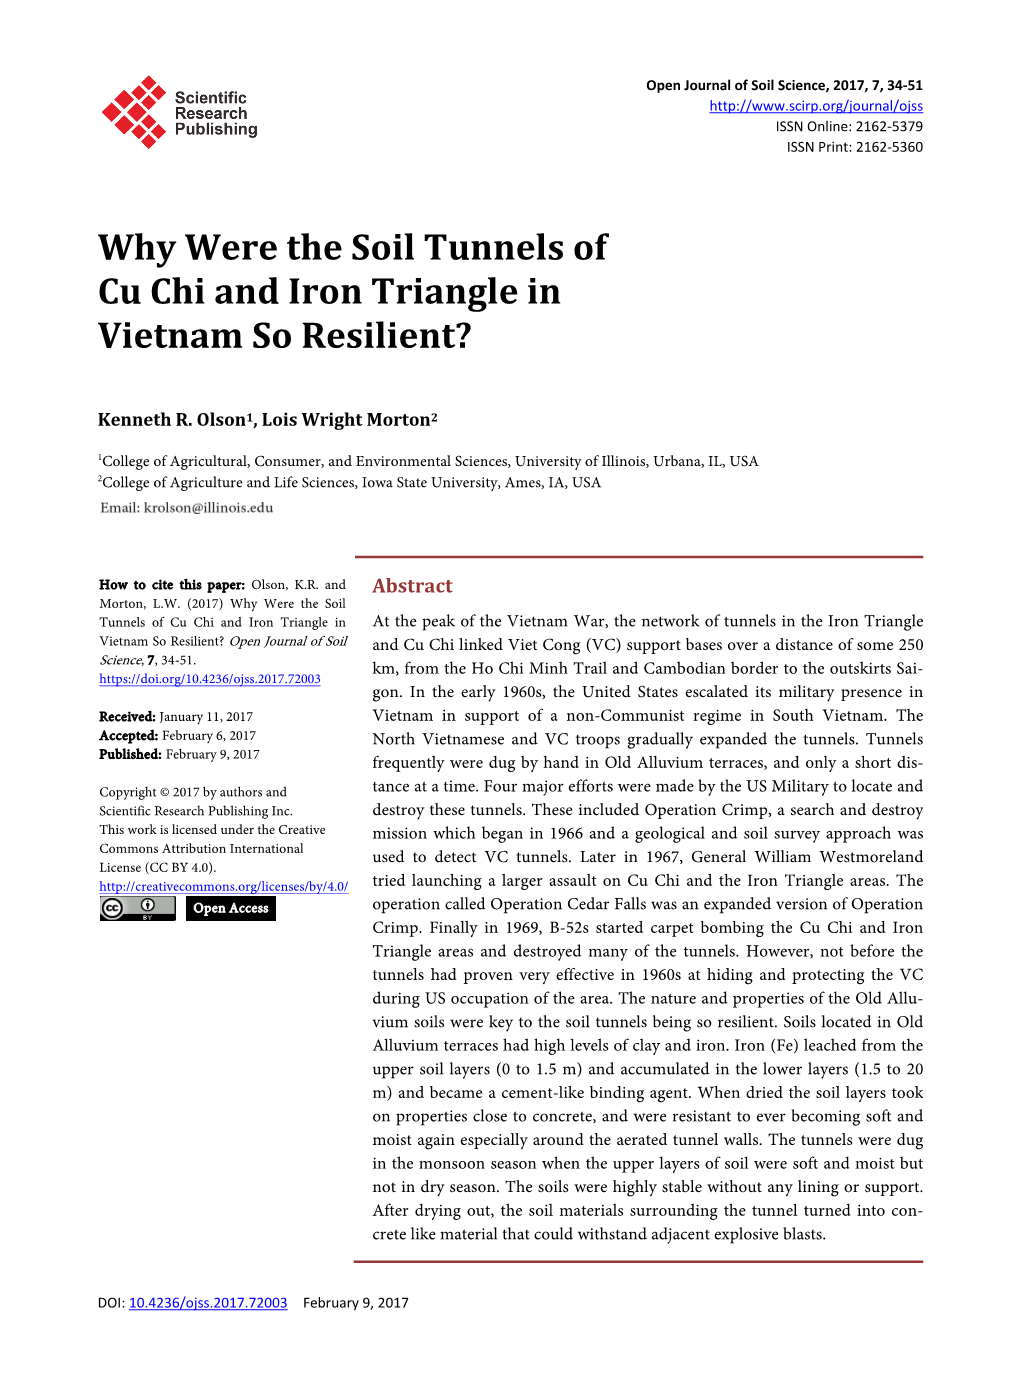 Why Were the Soil Tunnels of Cu Chi and Iron Triangle in Vietnam So Resilient?